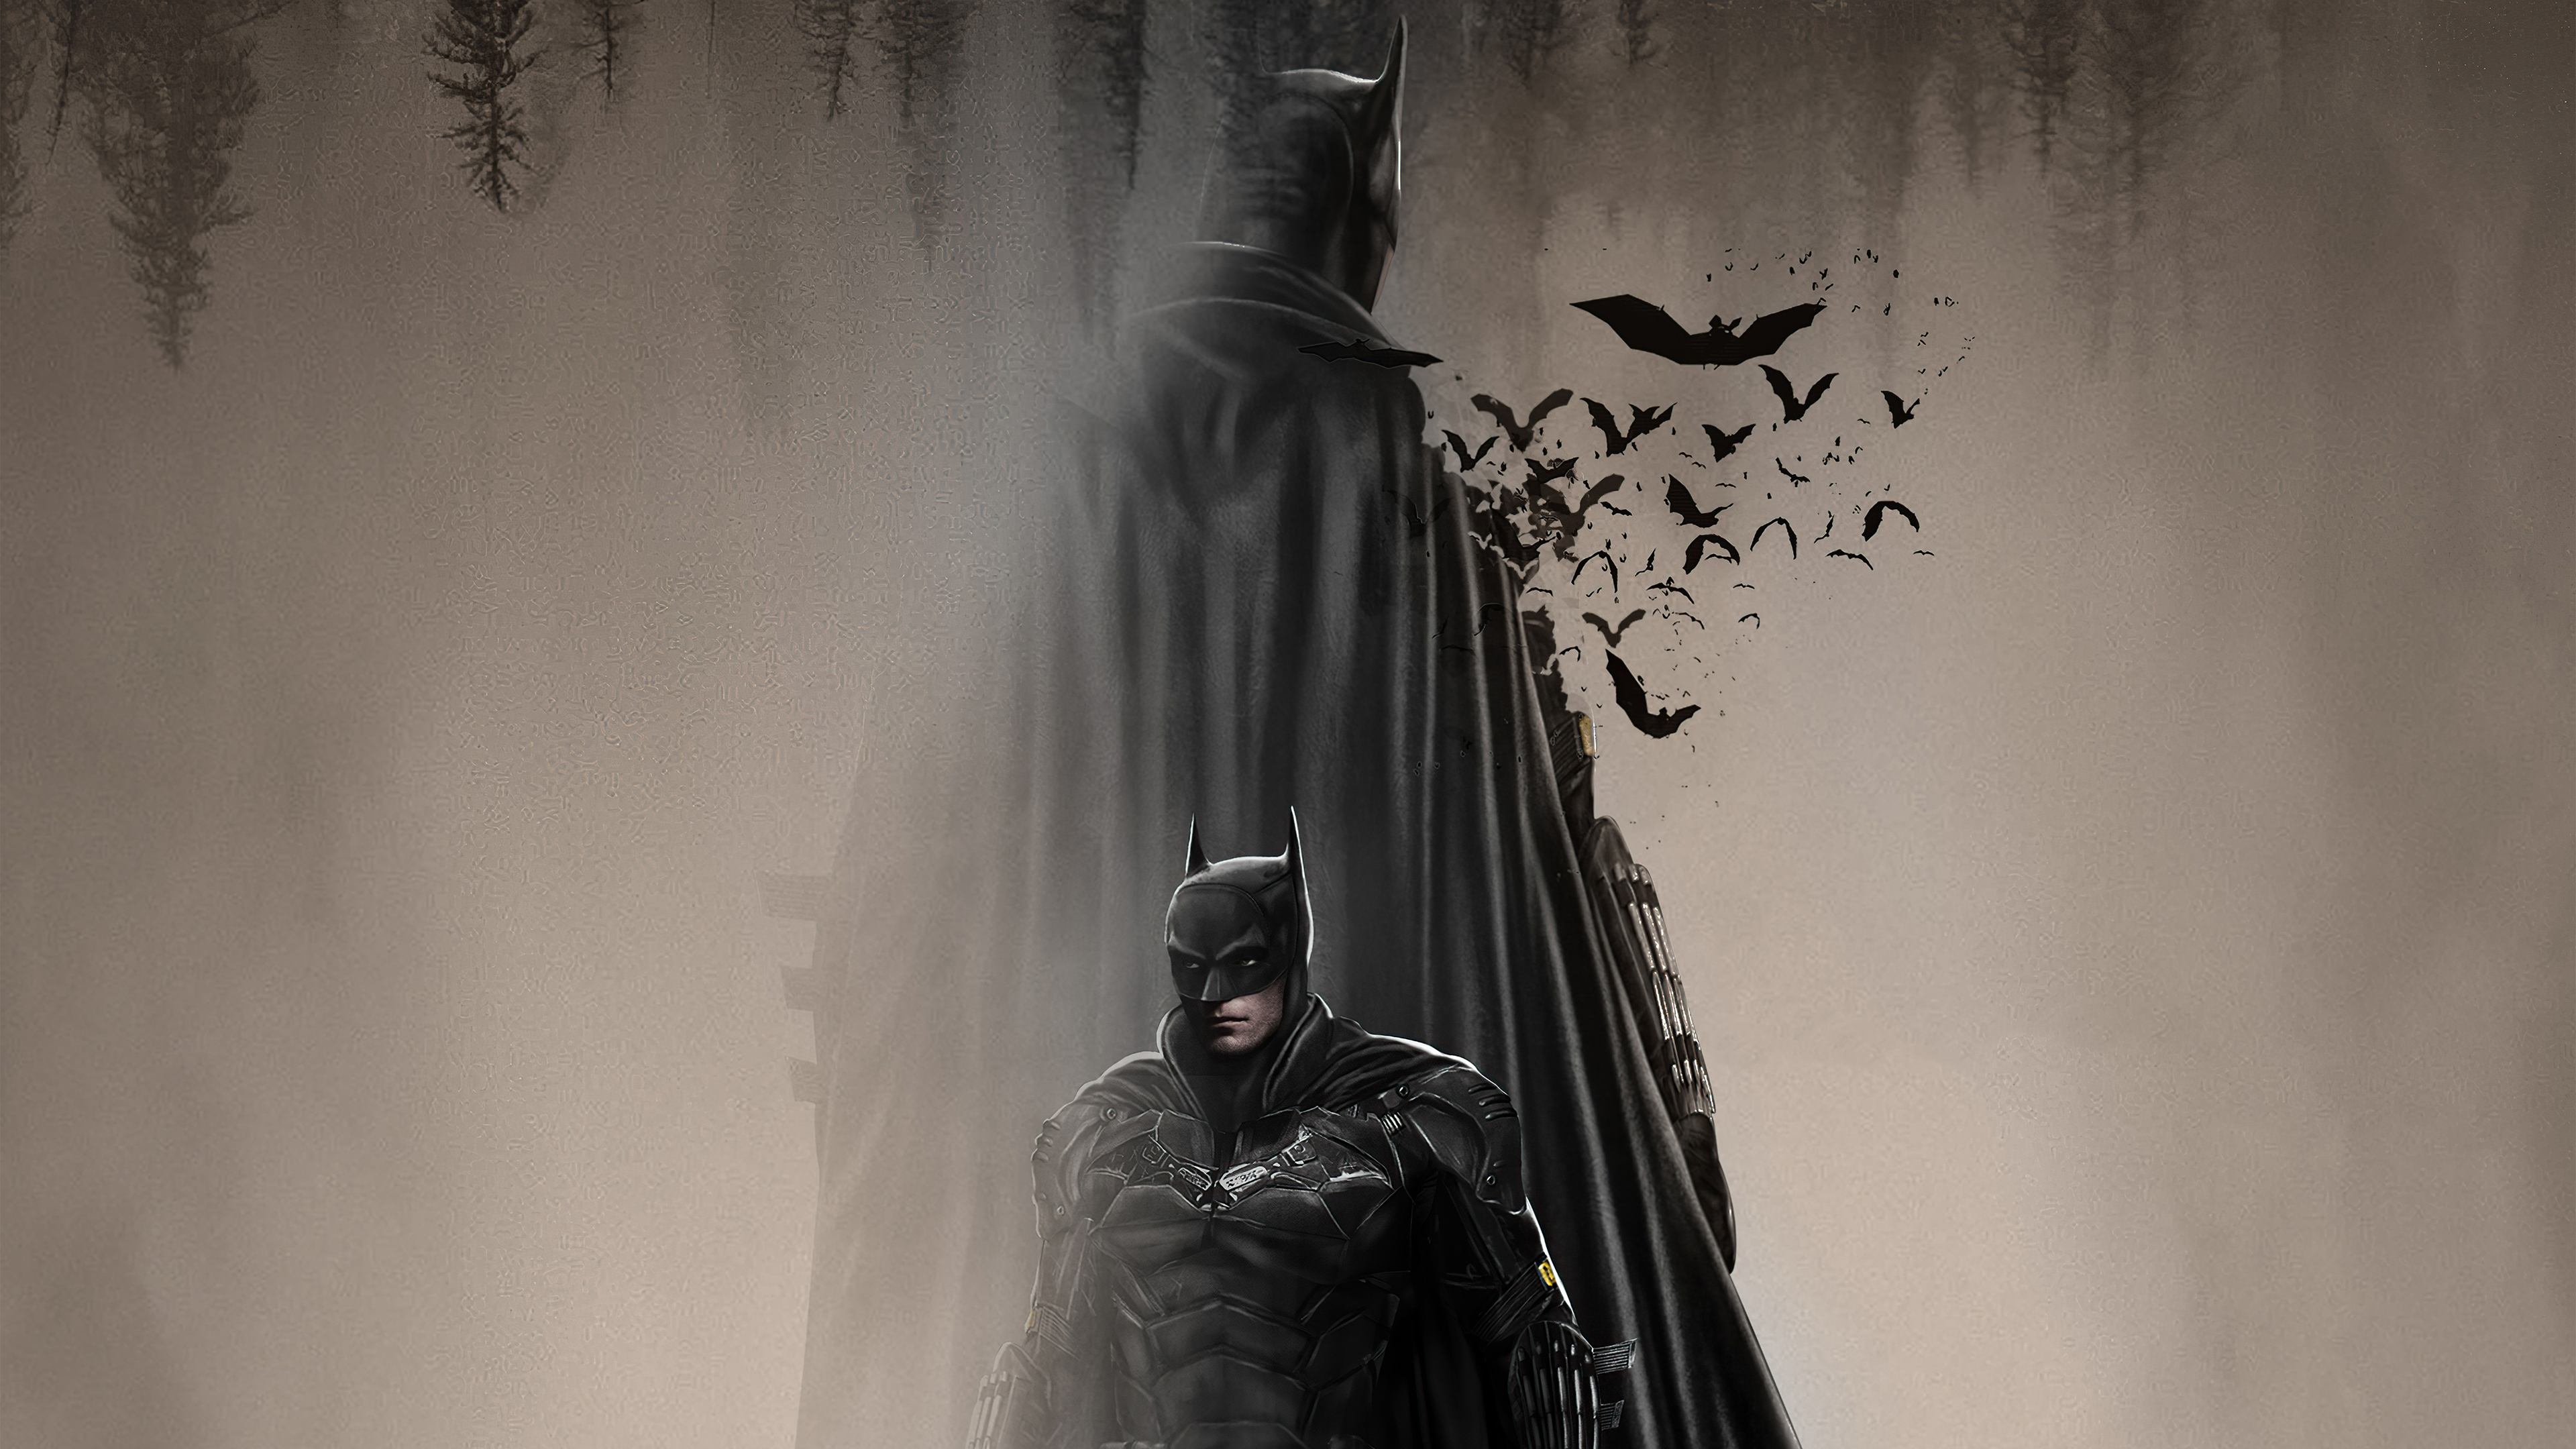 3840x2160 The Batman In Dust 4k 4k HD 4k Wallpapers, Images, Backgrounds,  Photos and Pictures